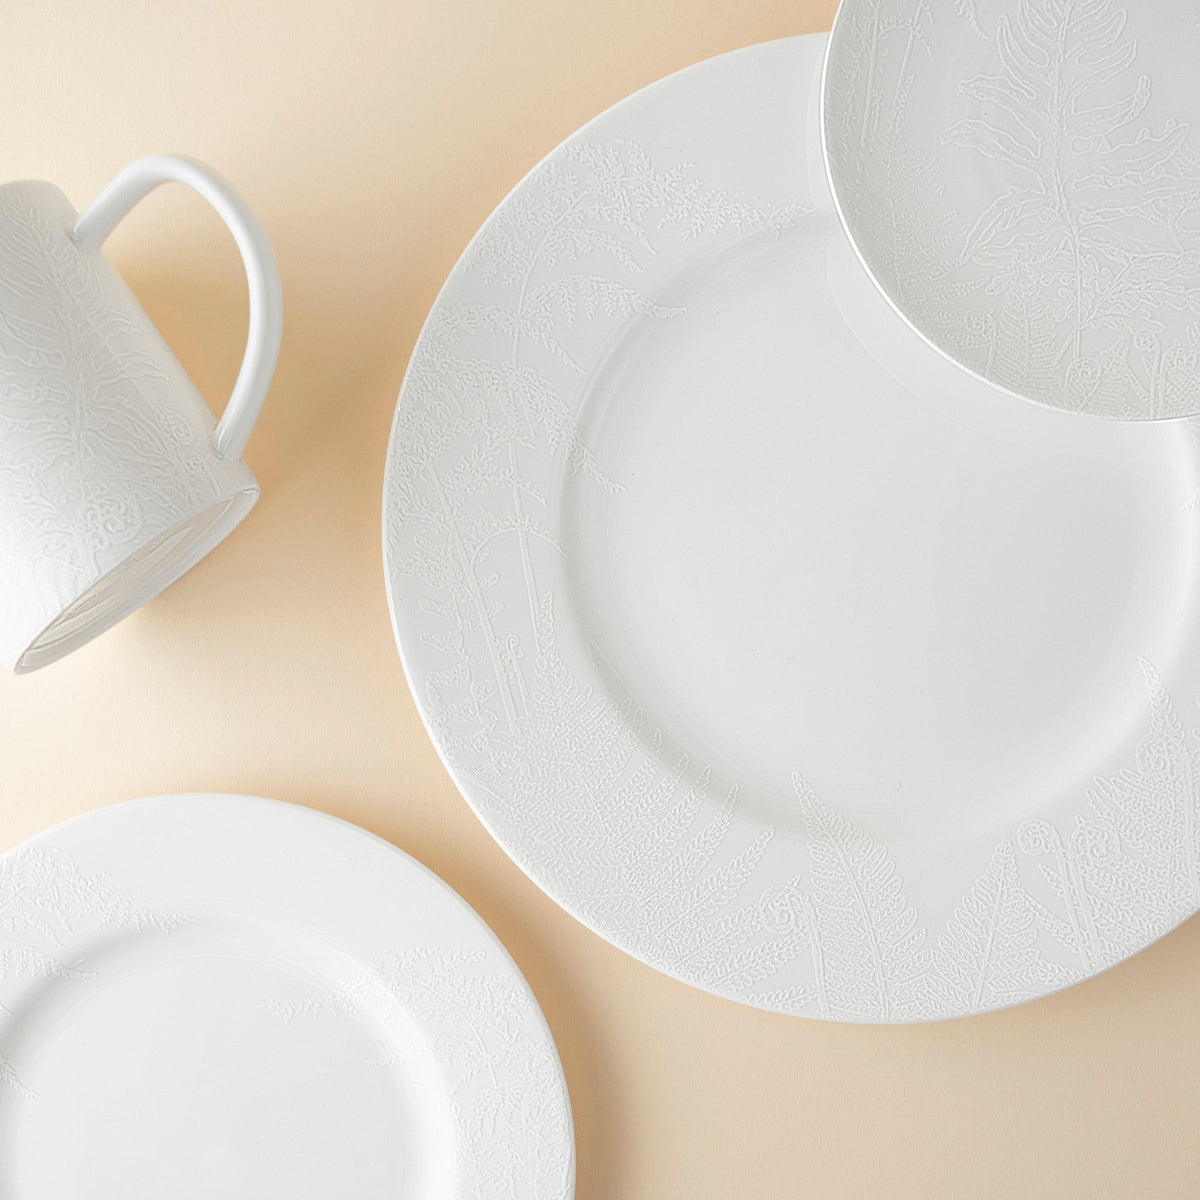 A set of Spring White Canapé Plates and mugs by Caskata Artisanal Home, in white porcelain, on a table.